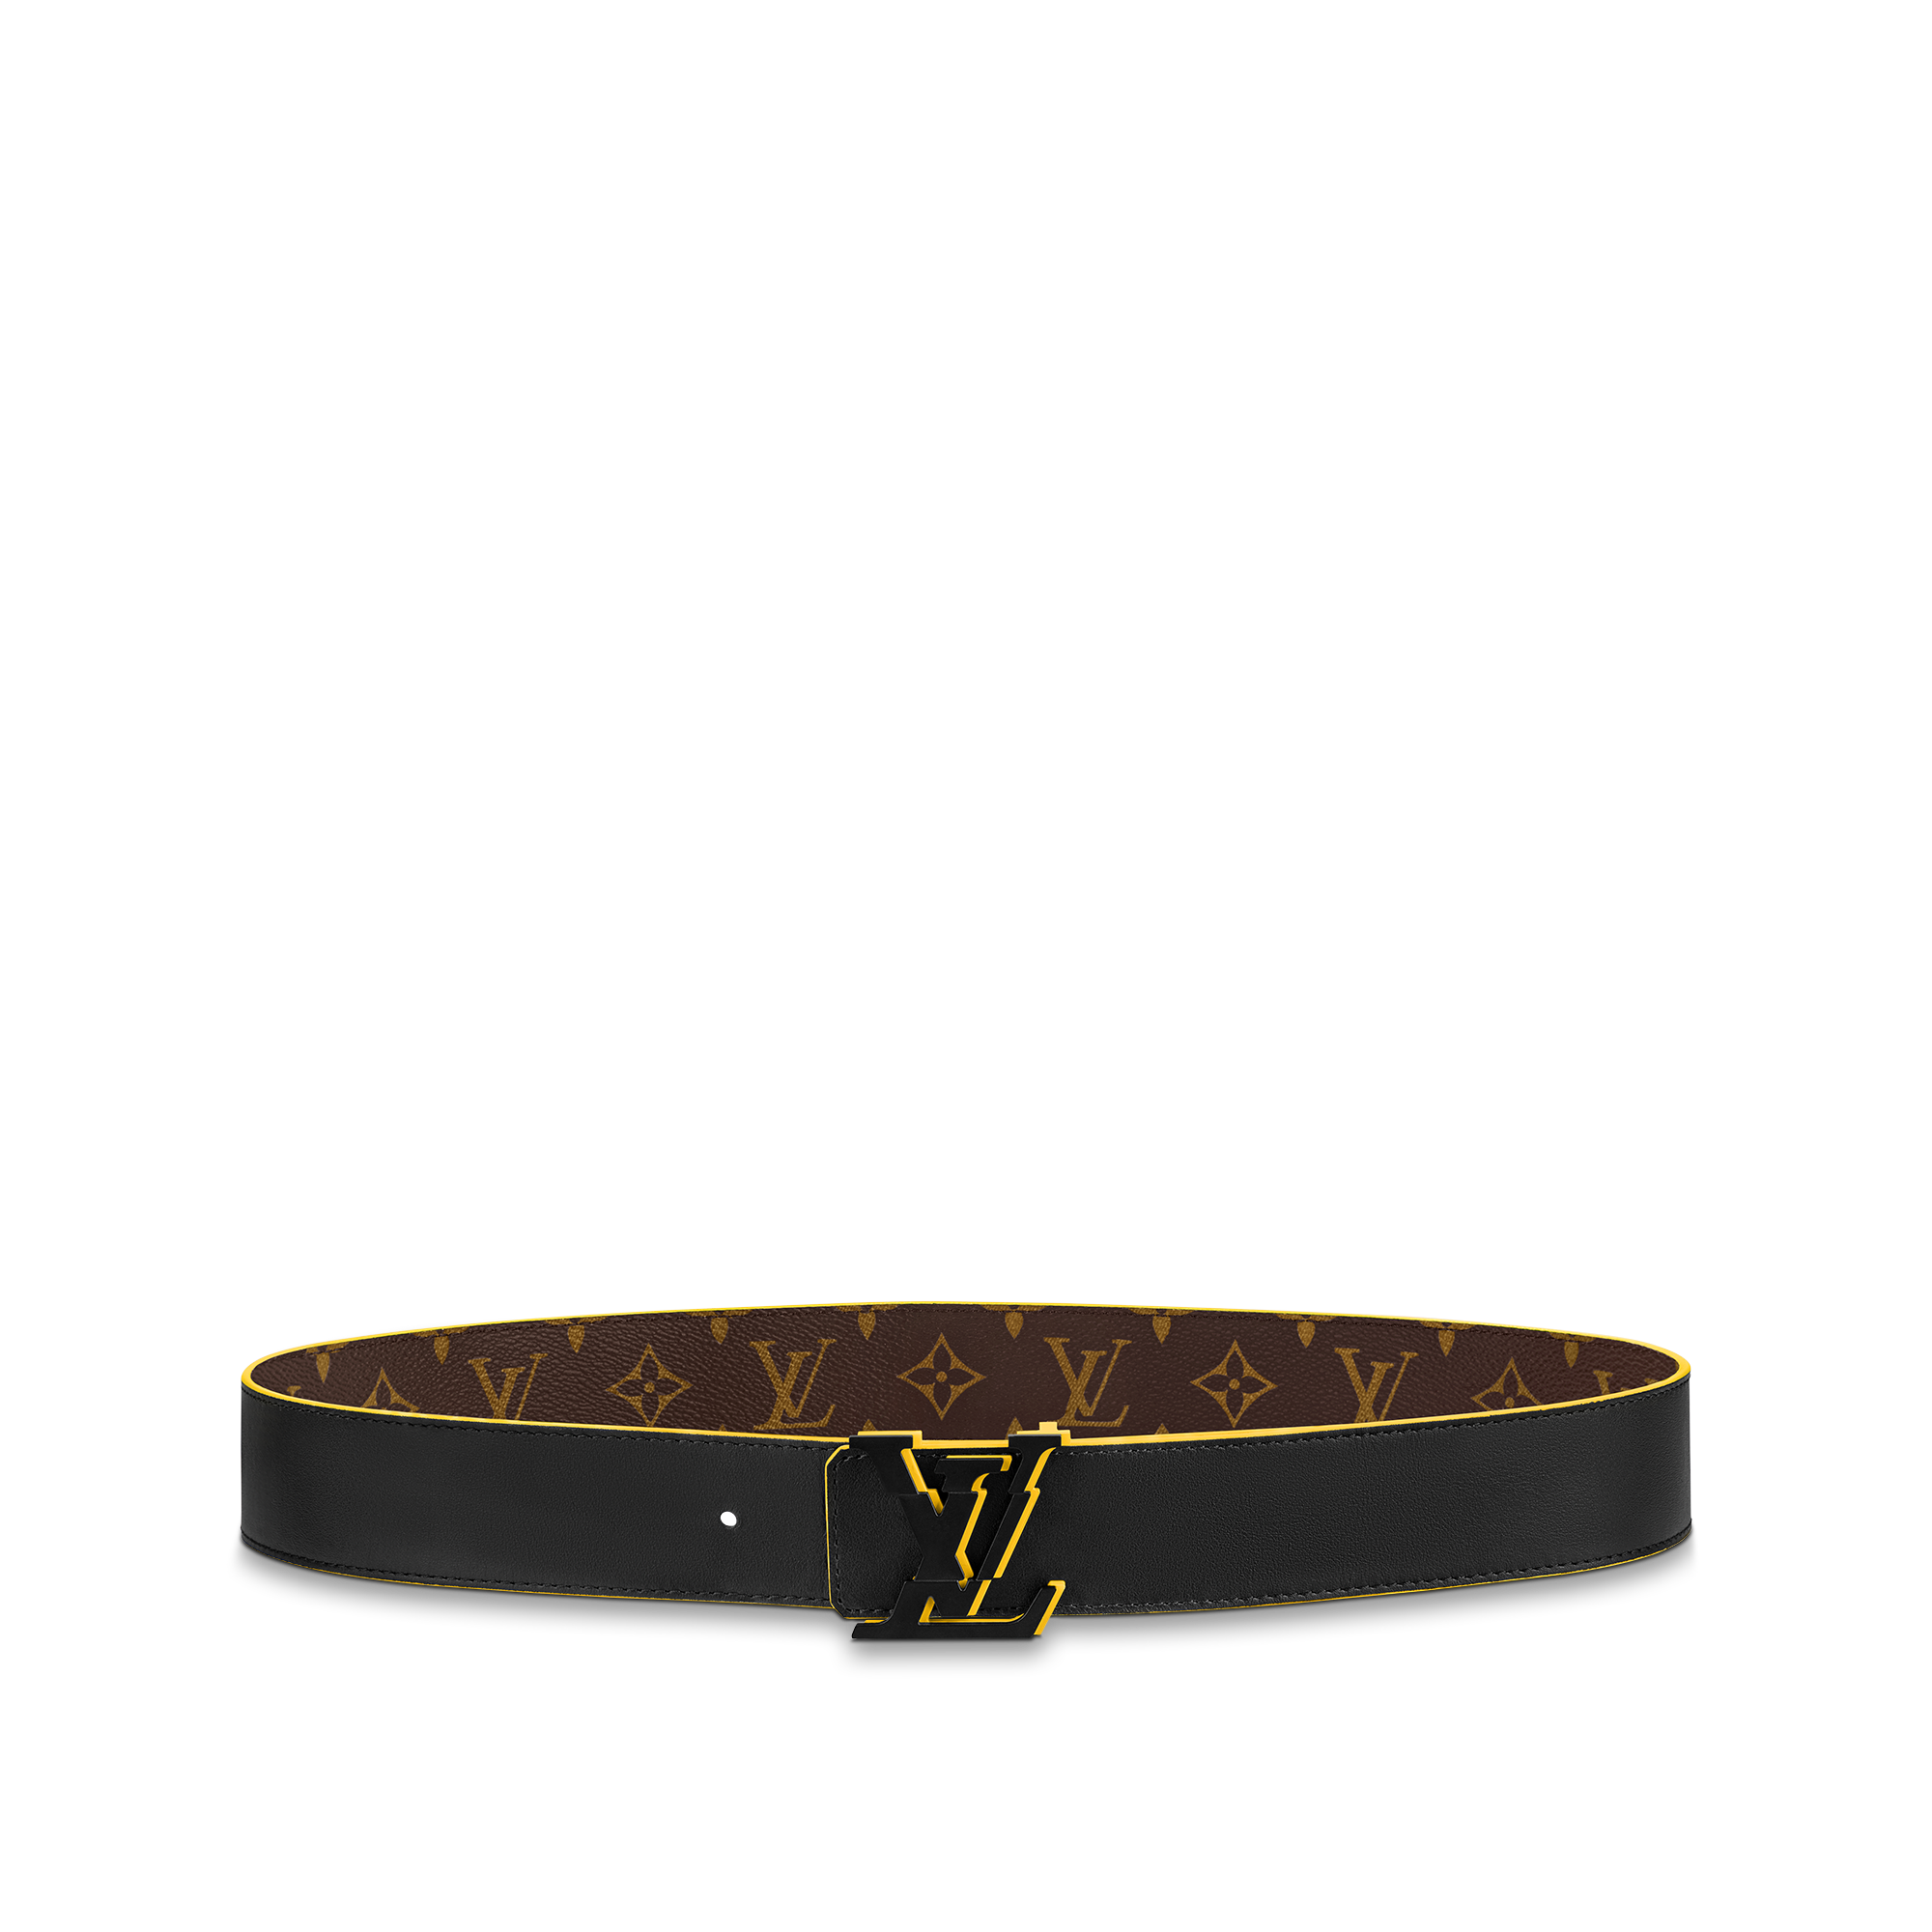 Share This Image - Louis Vuitton Belt Psd - 900x360 PNG Download - PNGkit